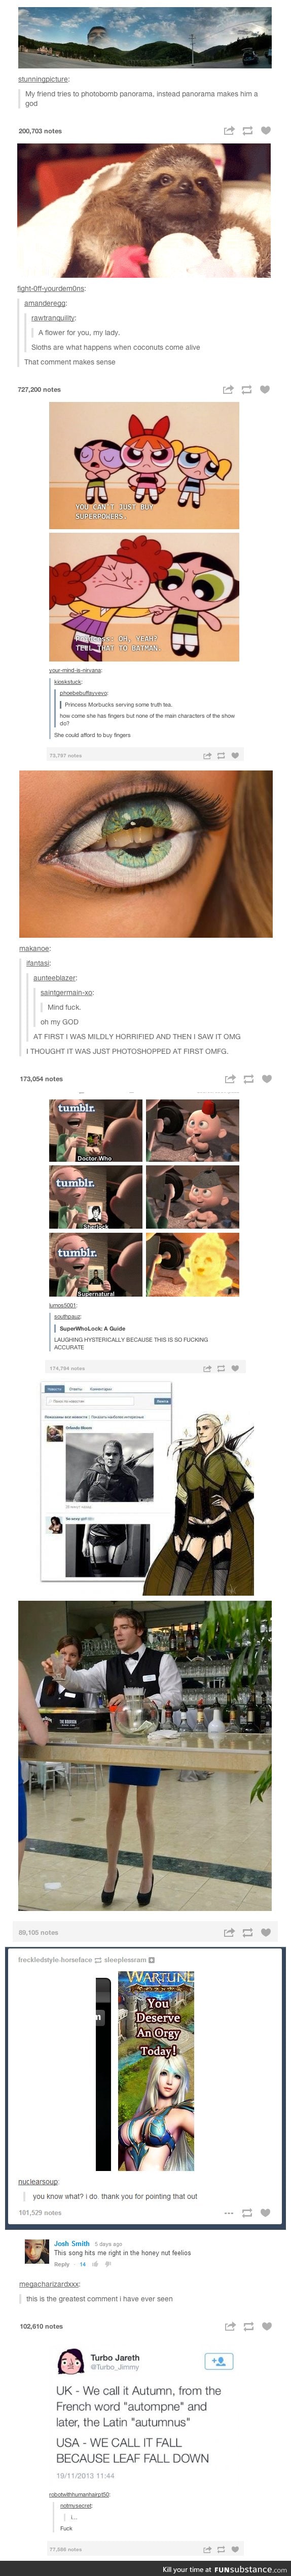 Another Tumblr compilation